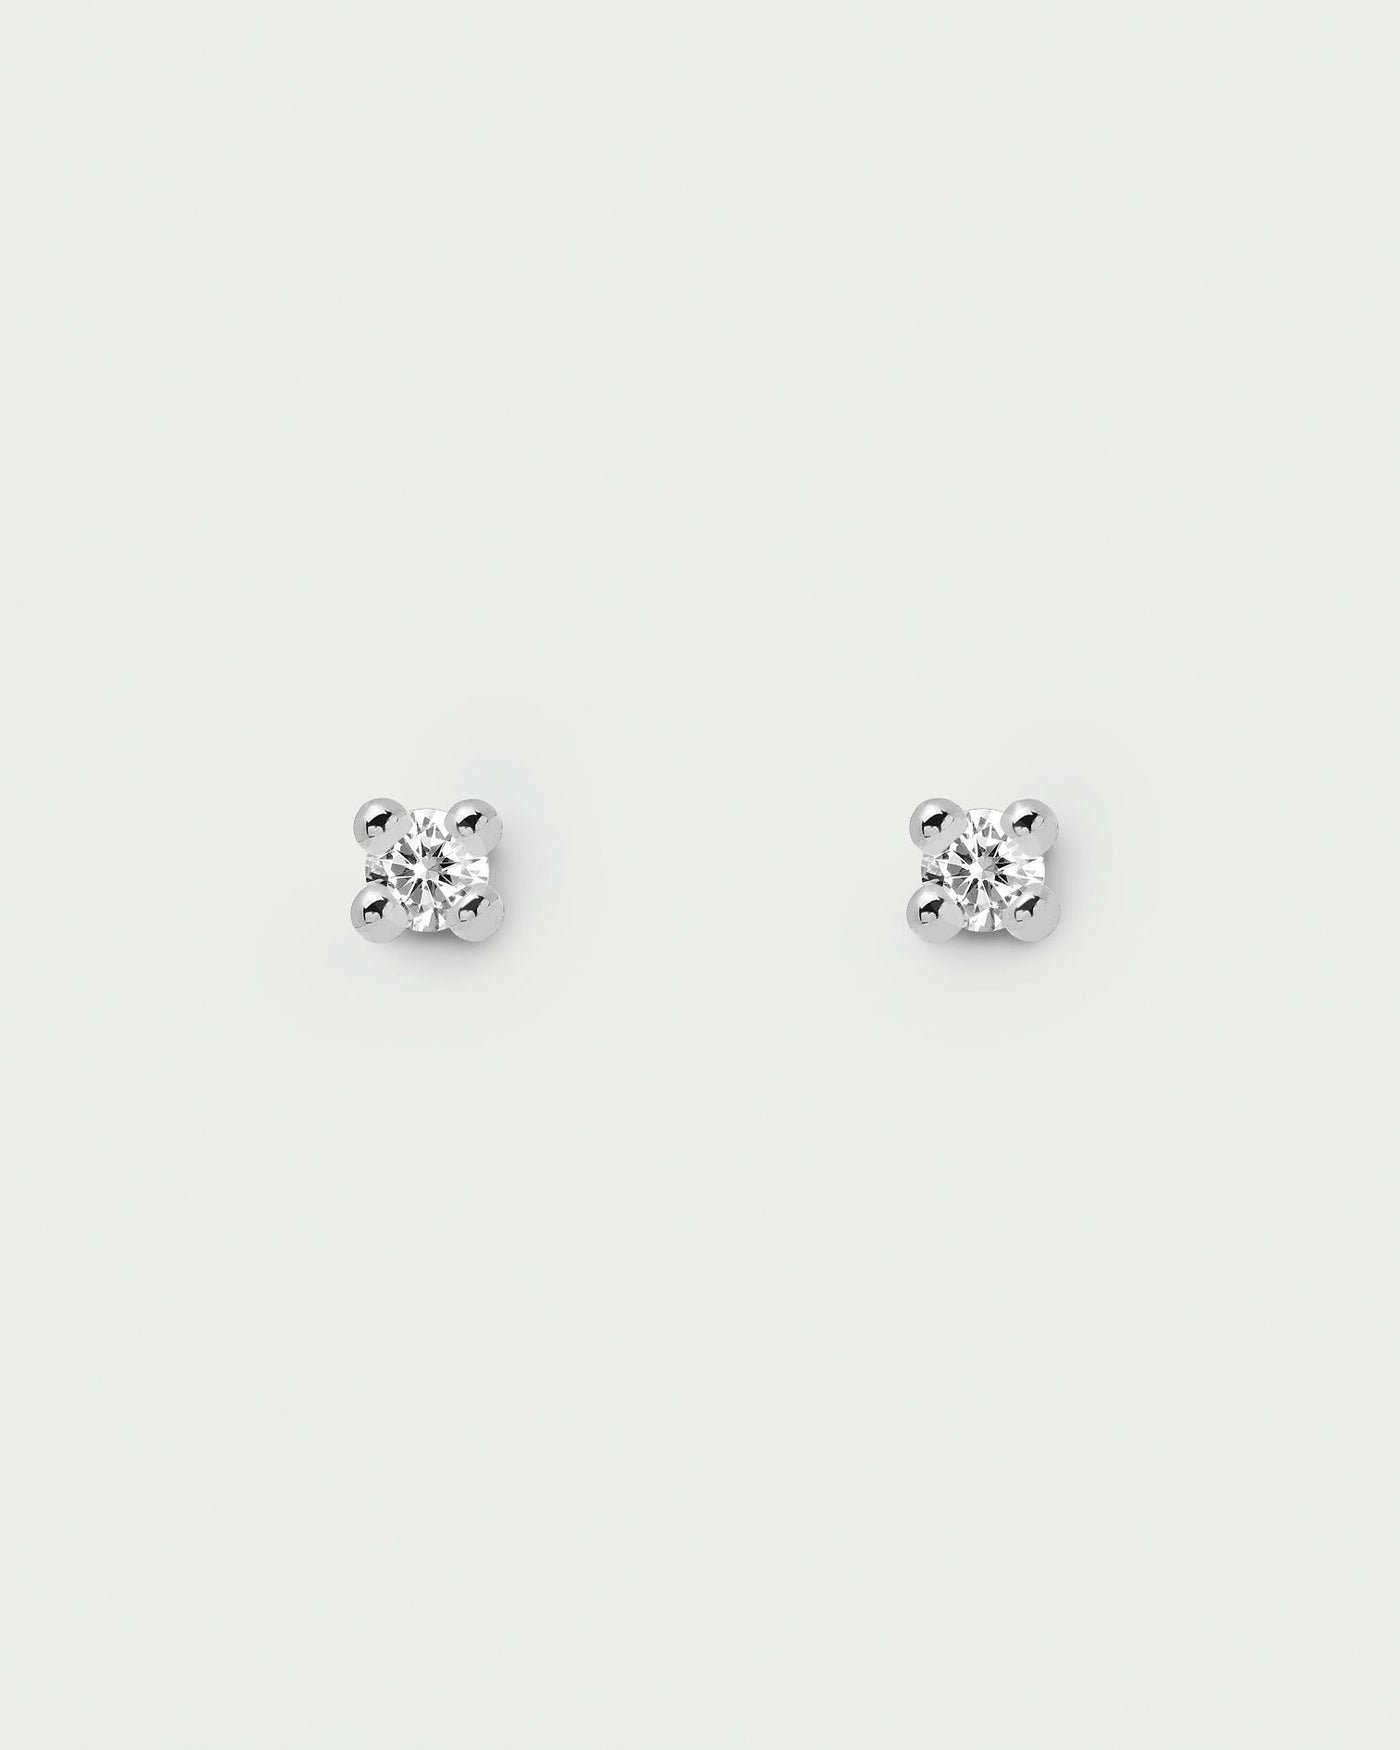 2024 Selection | Essentia Silver Earrings. Pair of 925 sterling silver stud earrings set with a white zirconia stone. Get the latest arrival from PDPAOLA. Place your order safely and get this Best Seller. Free Shipping.